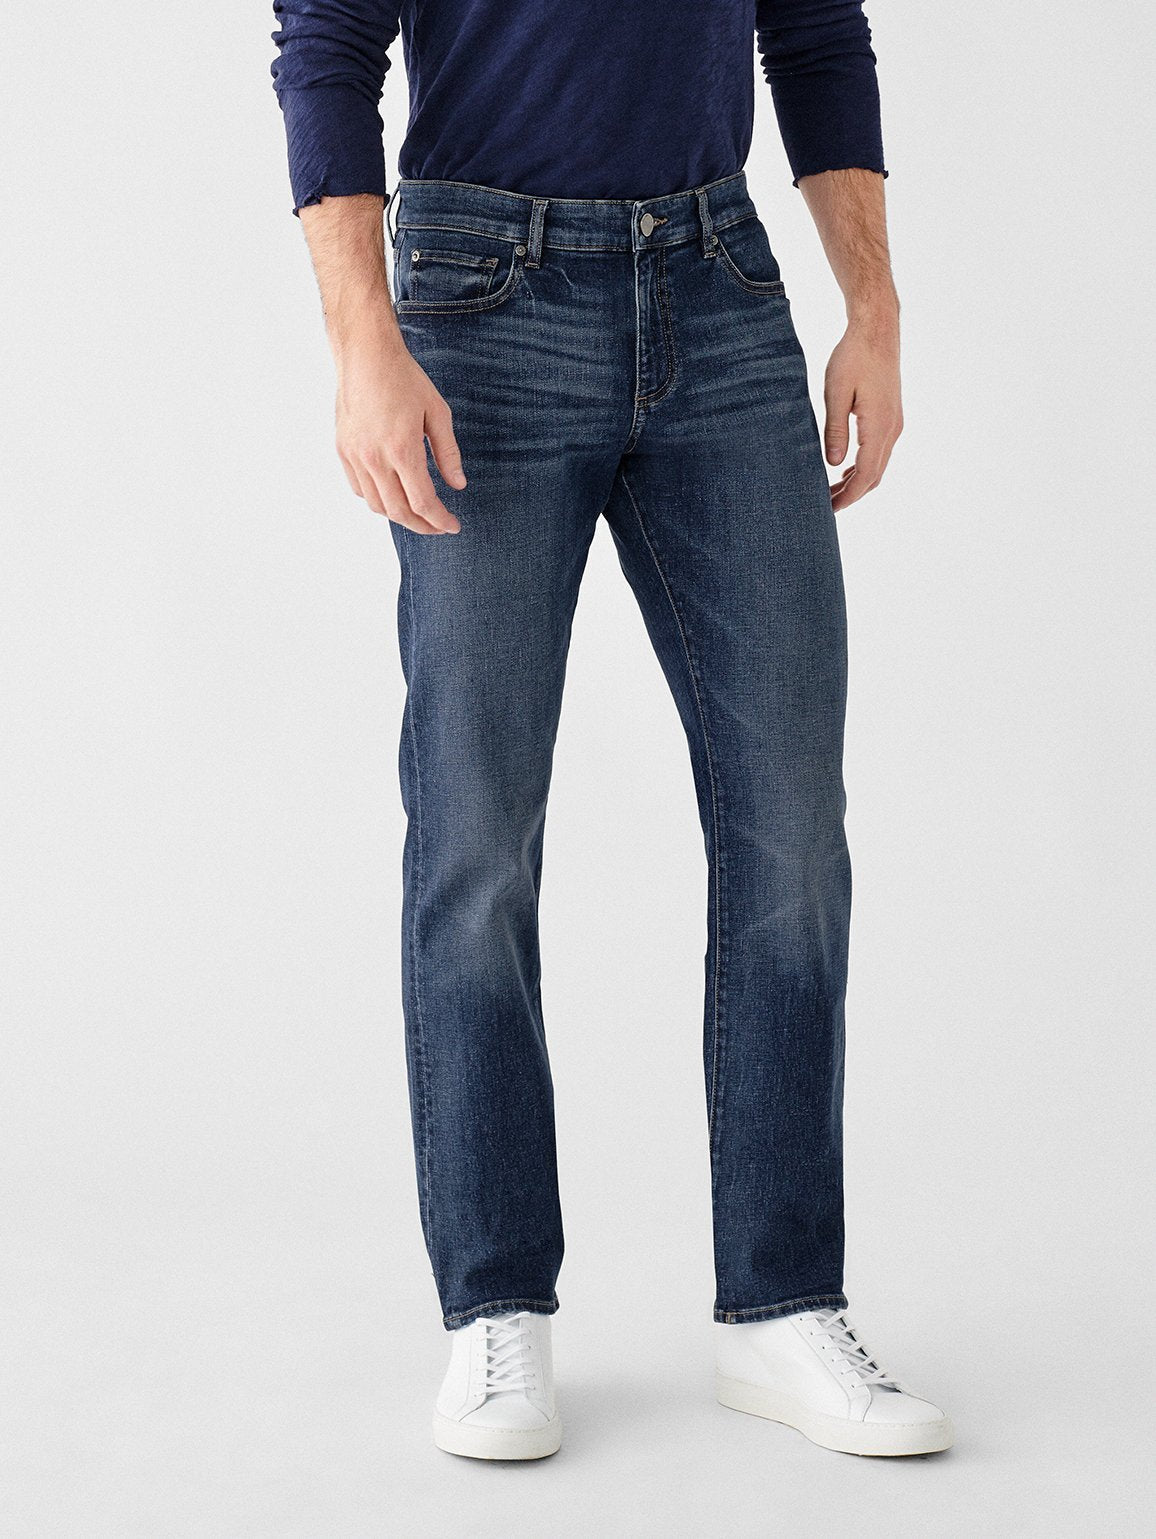 dl1961 russell jeans